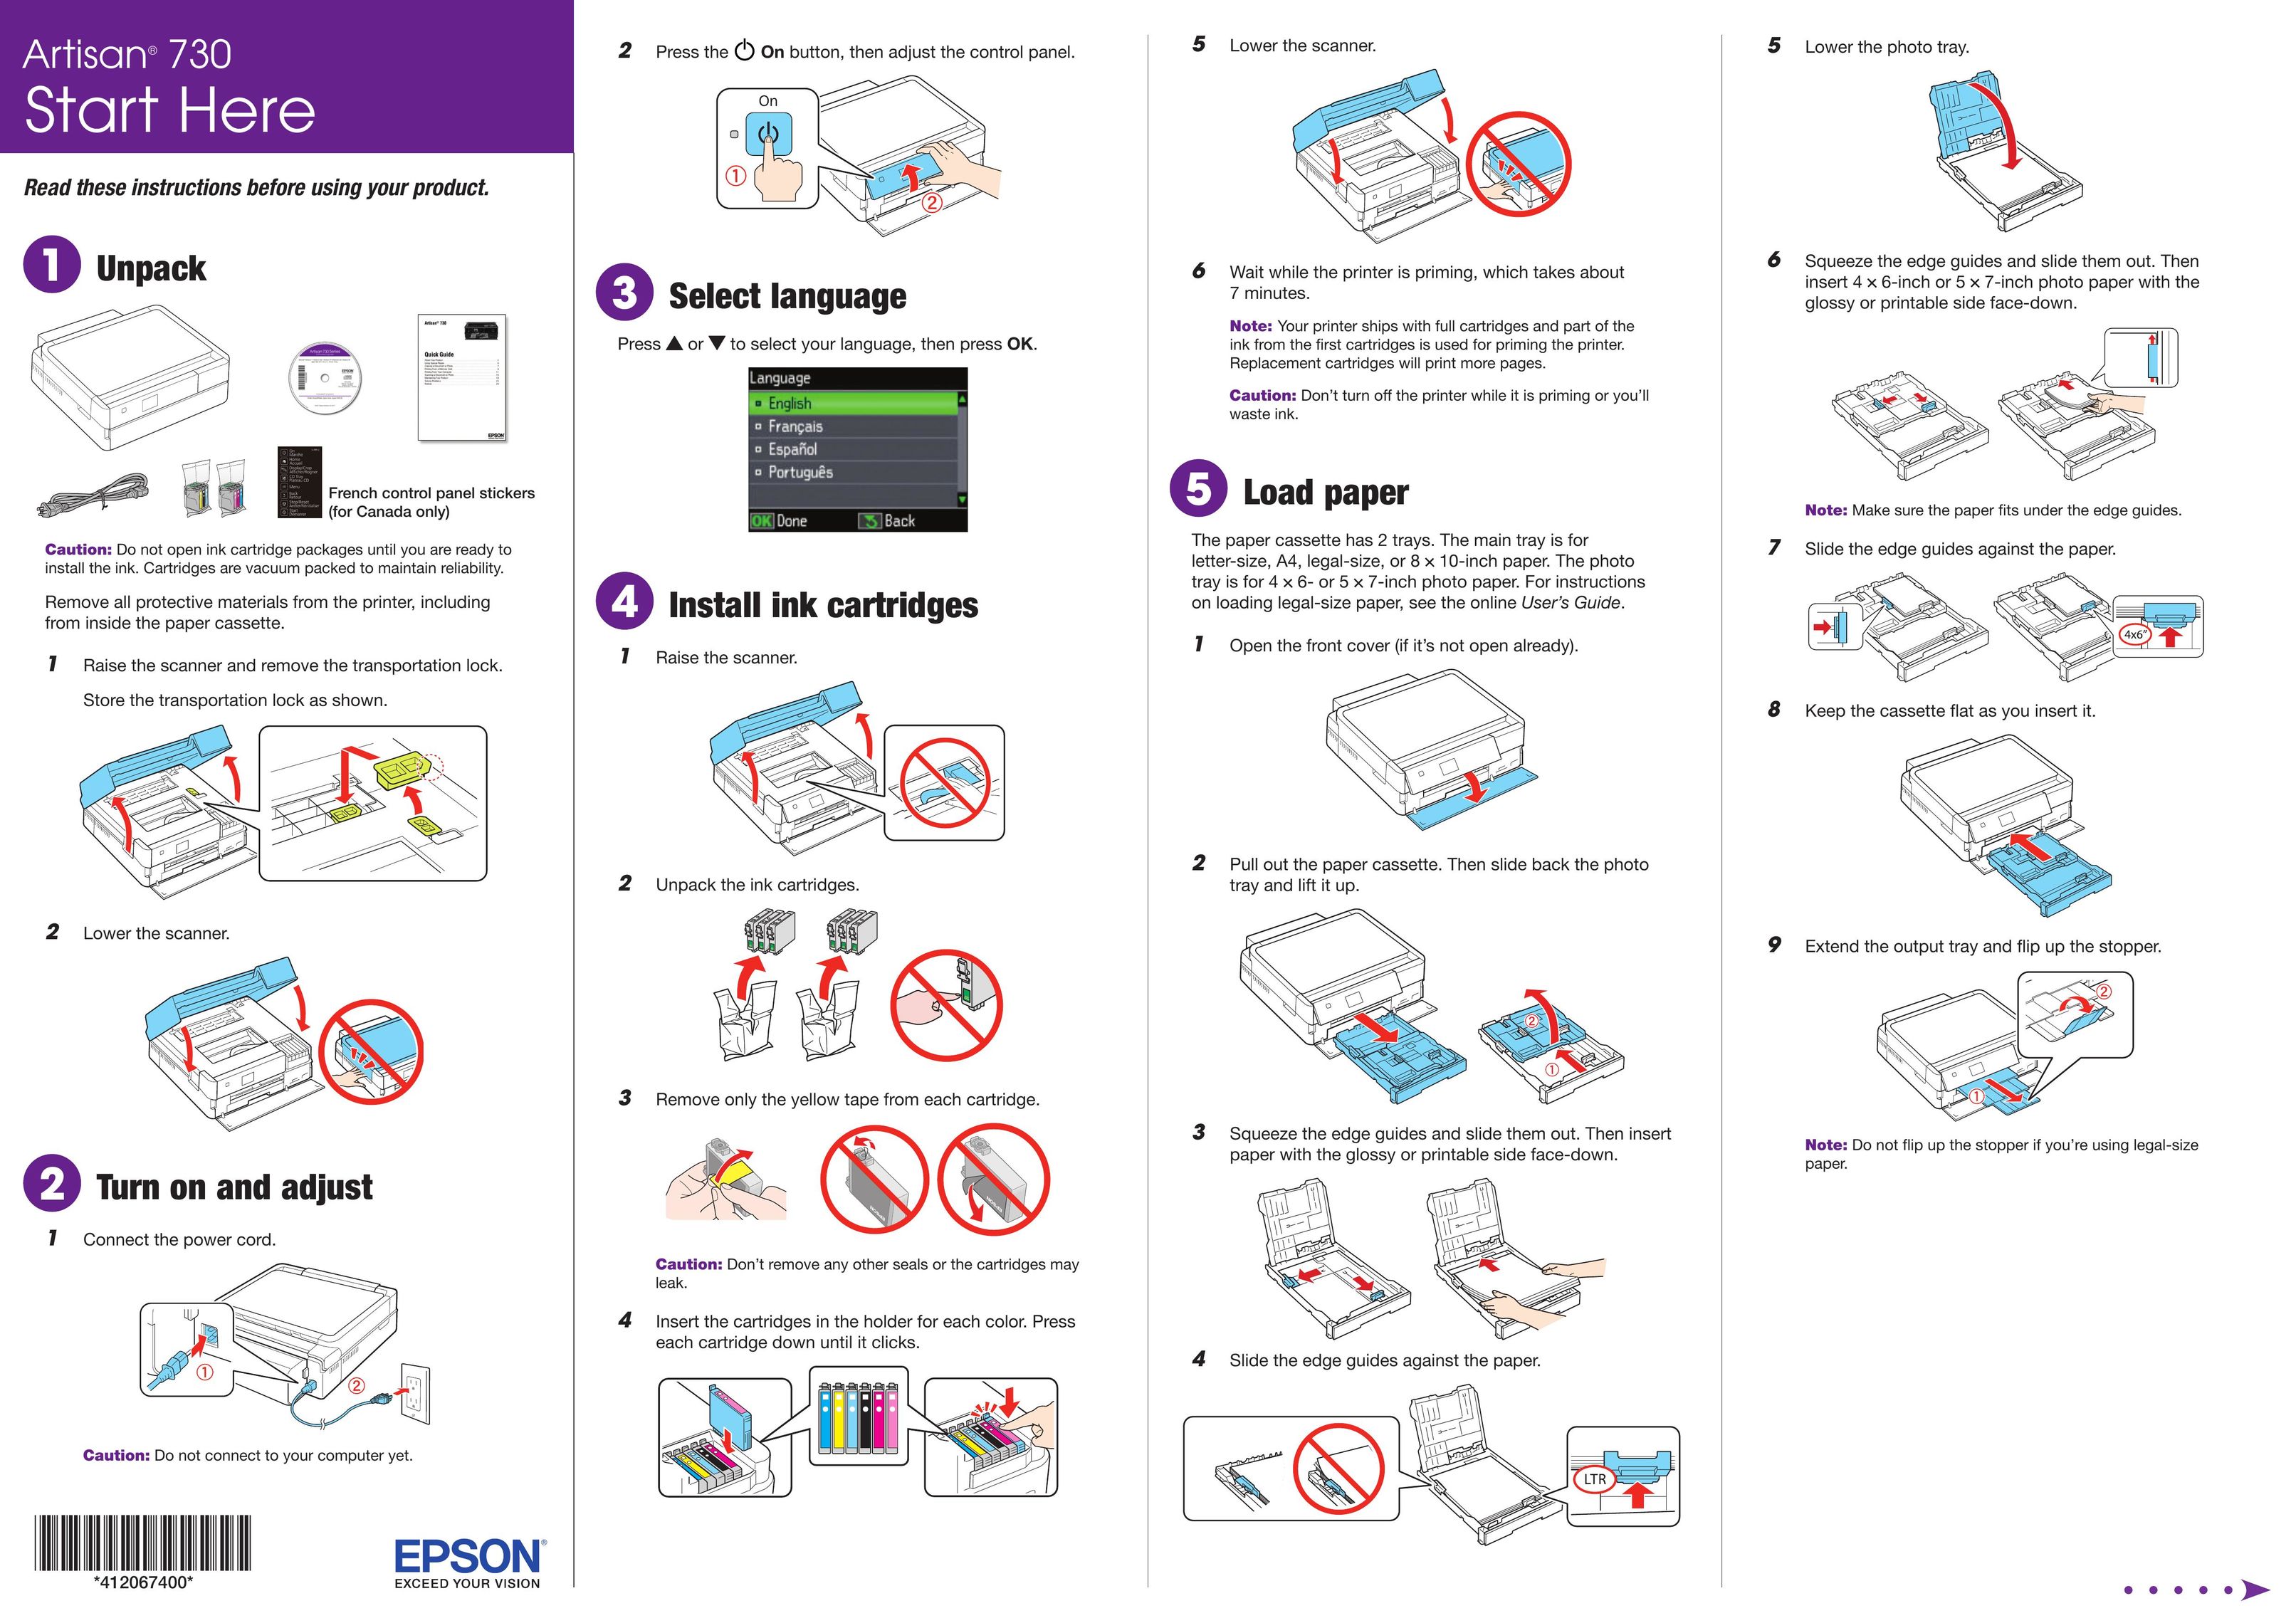 Epson 730 All in One Printer User Manual